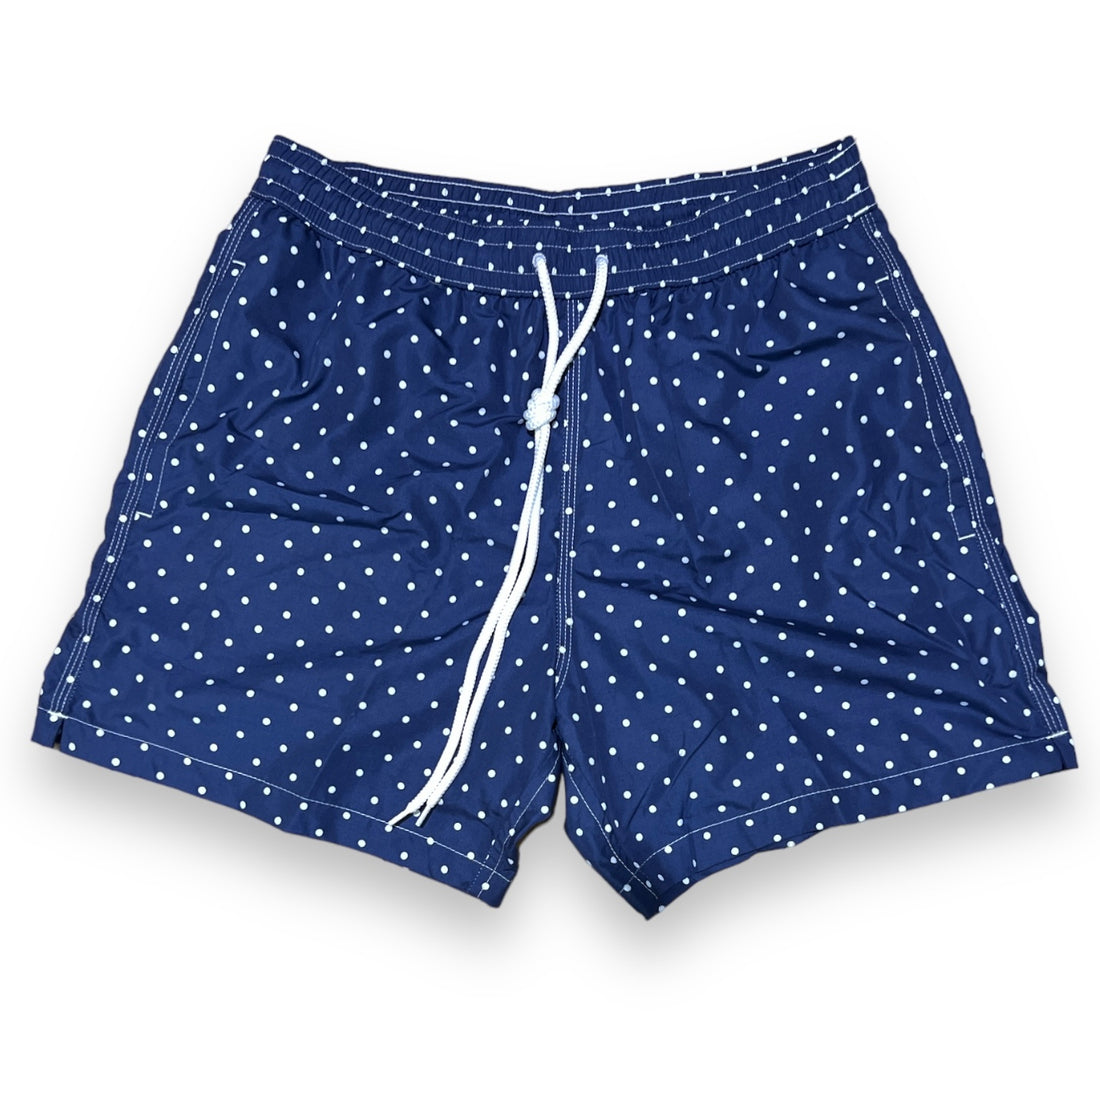 White dots on solid navy blue swimsuit